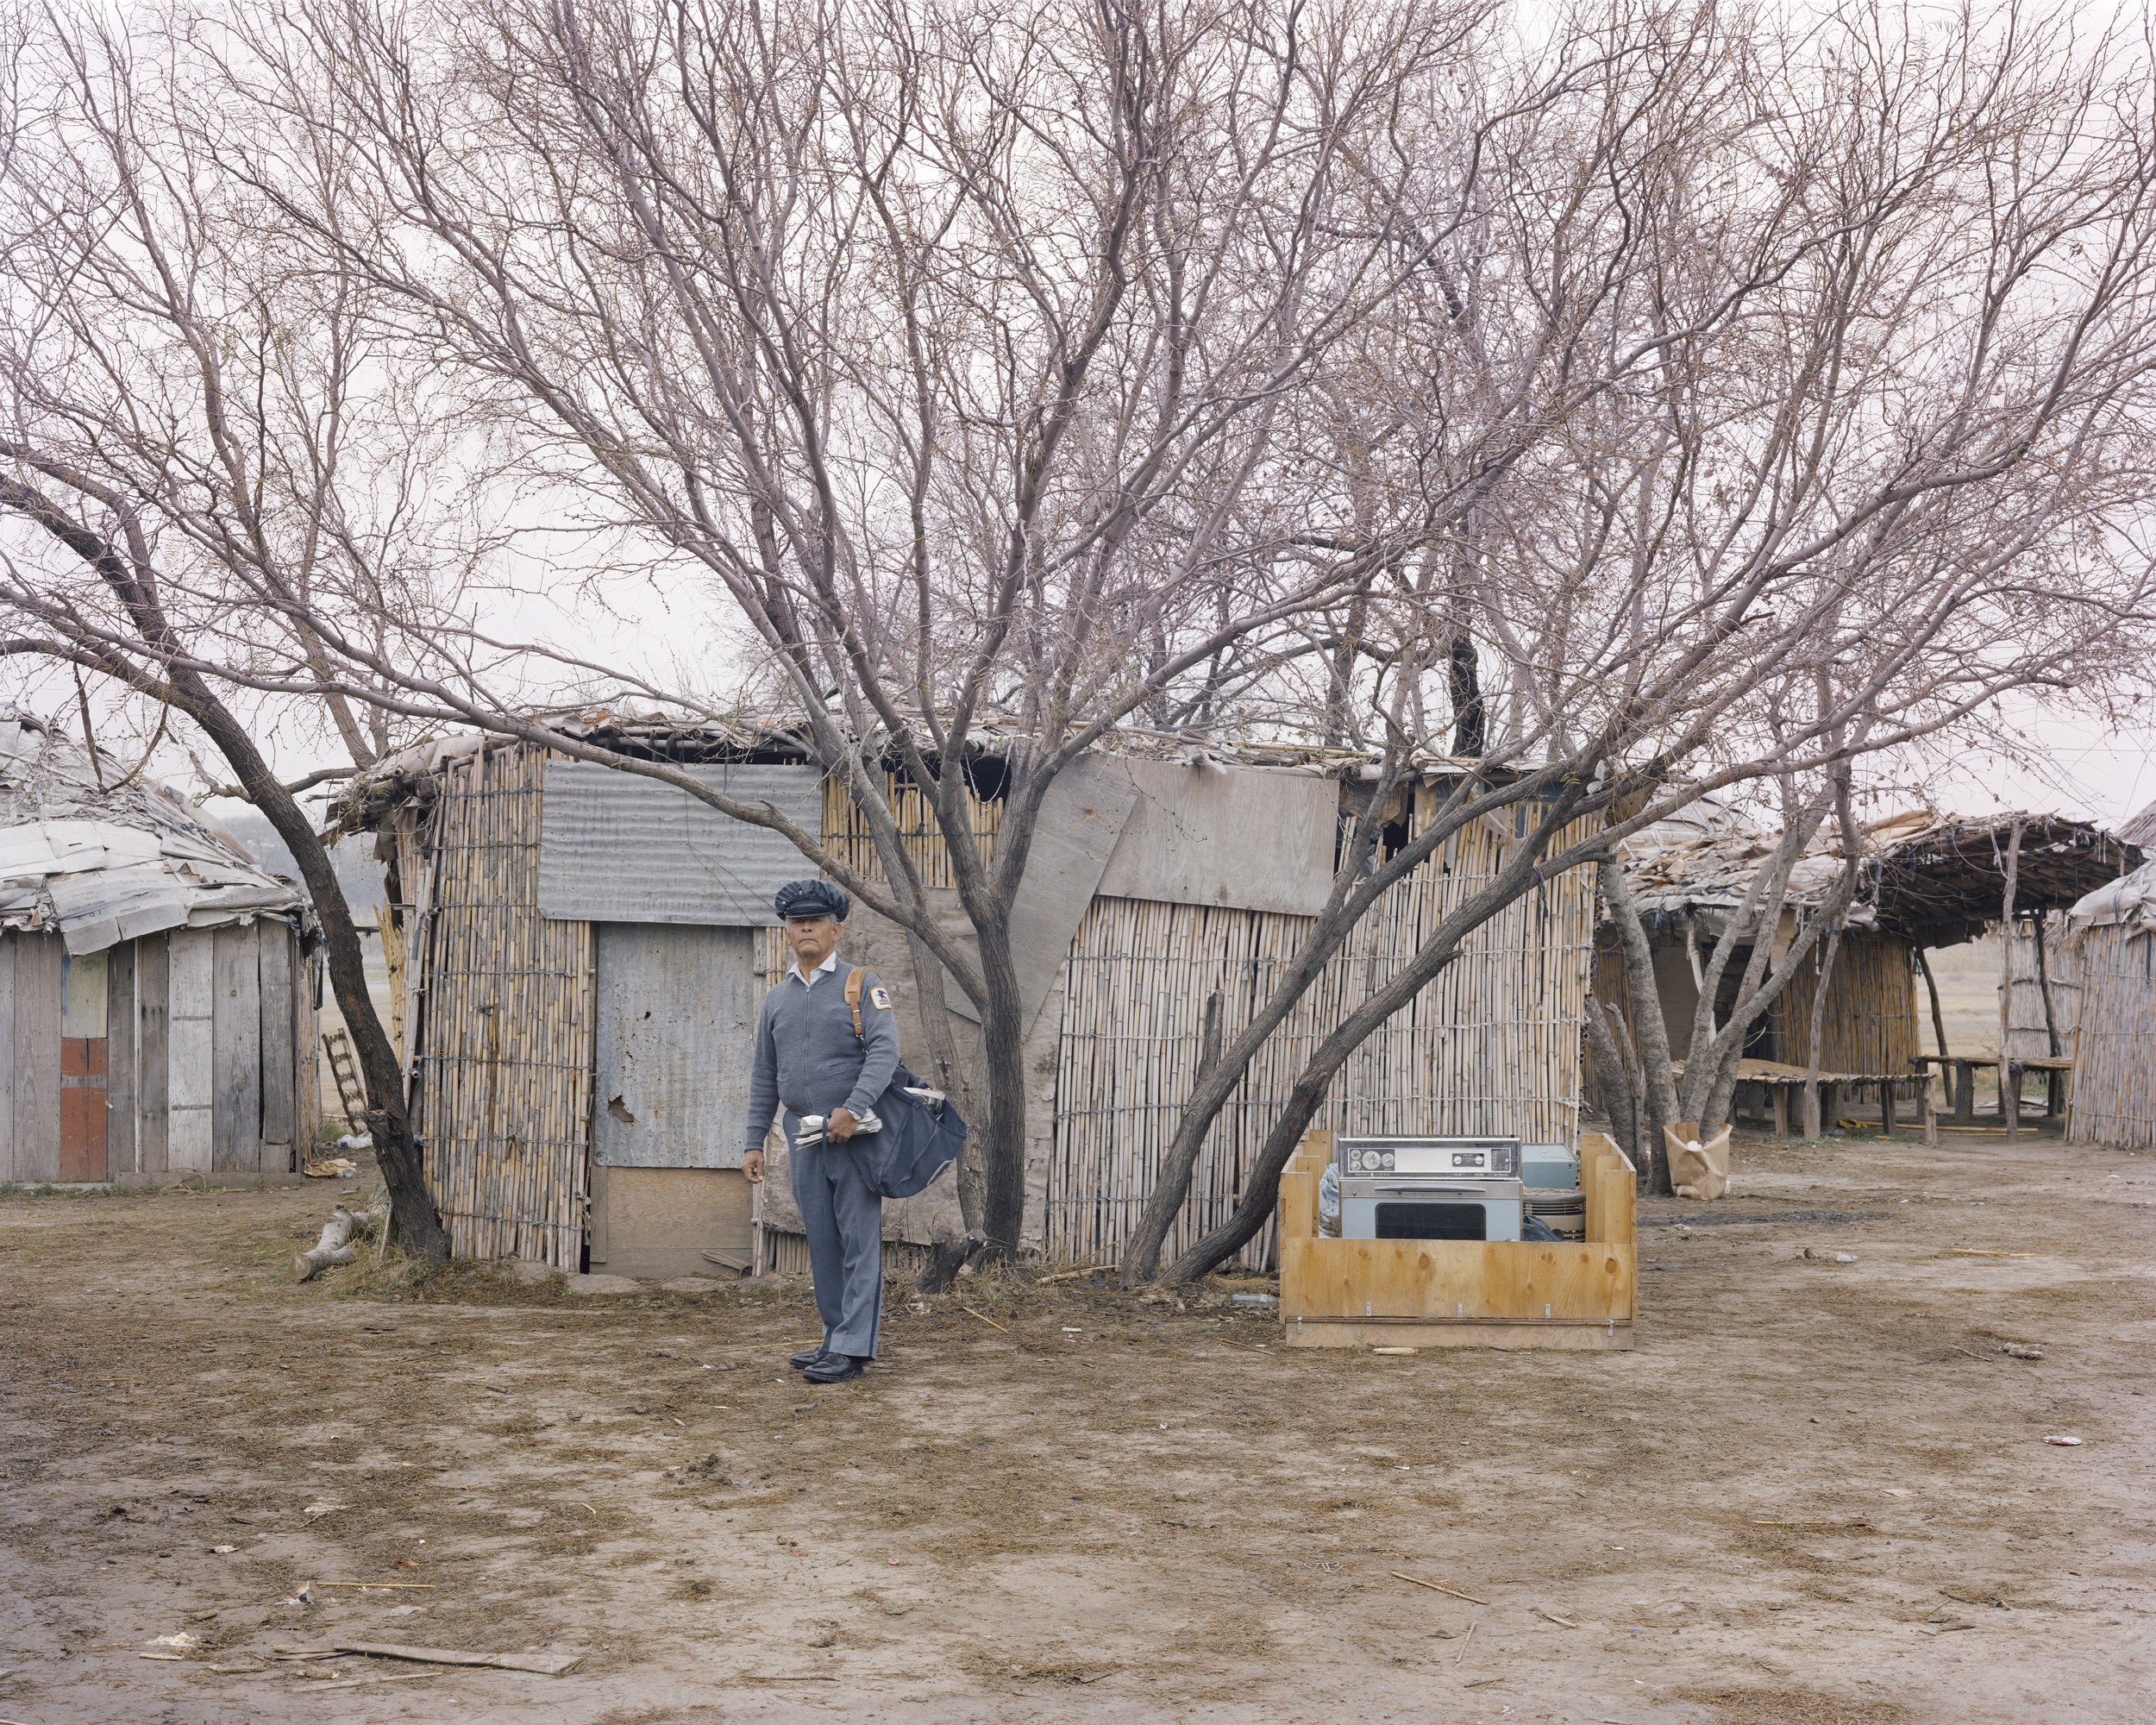  A Letter Carrier Delivering Mail in a Kickapoo Village Tribe, Eagle Pass, Texas, January 1983